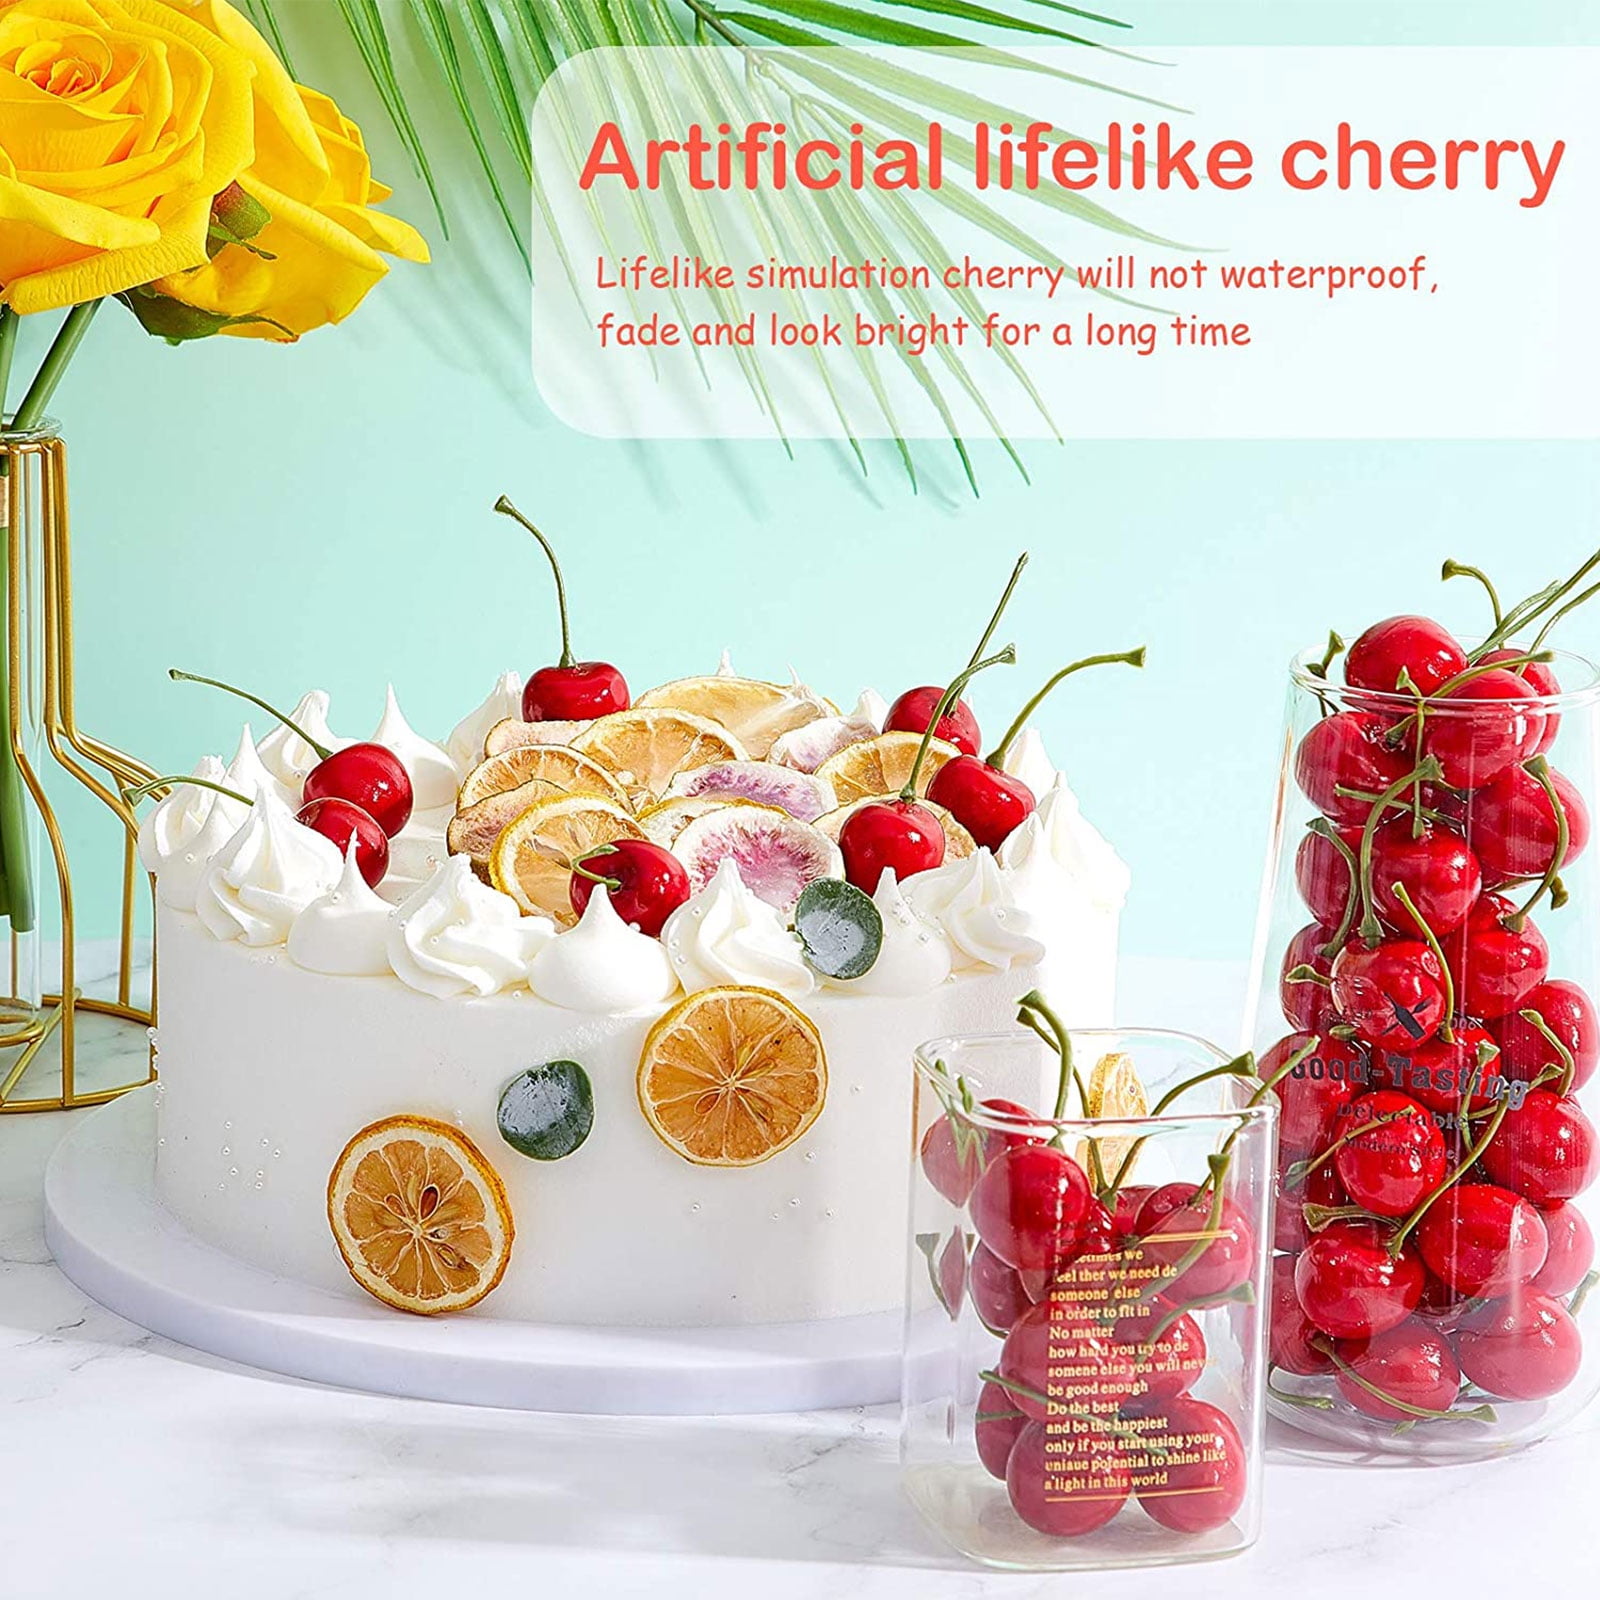 Up To 65% Off on Artificial Lifelike Cherry Pl